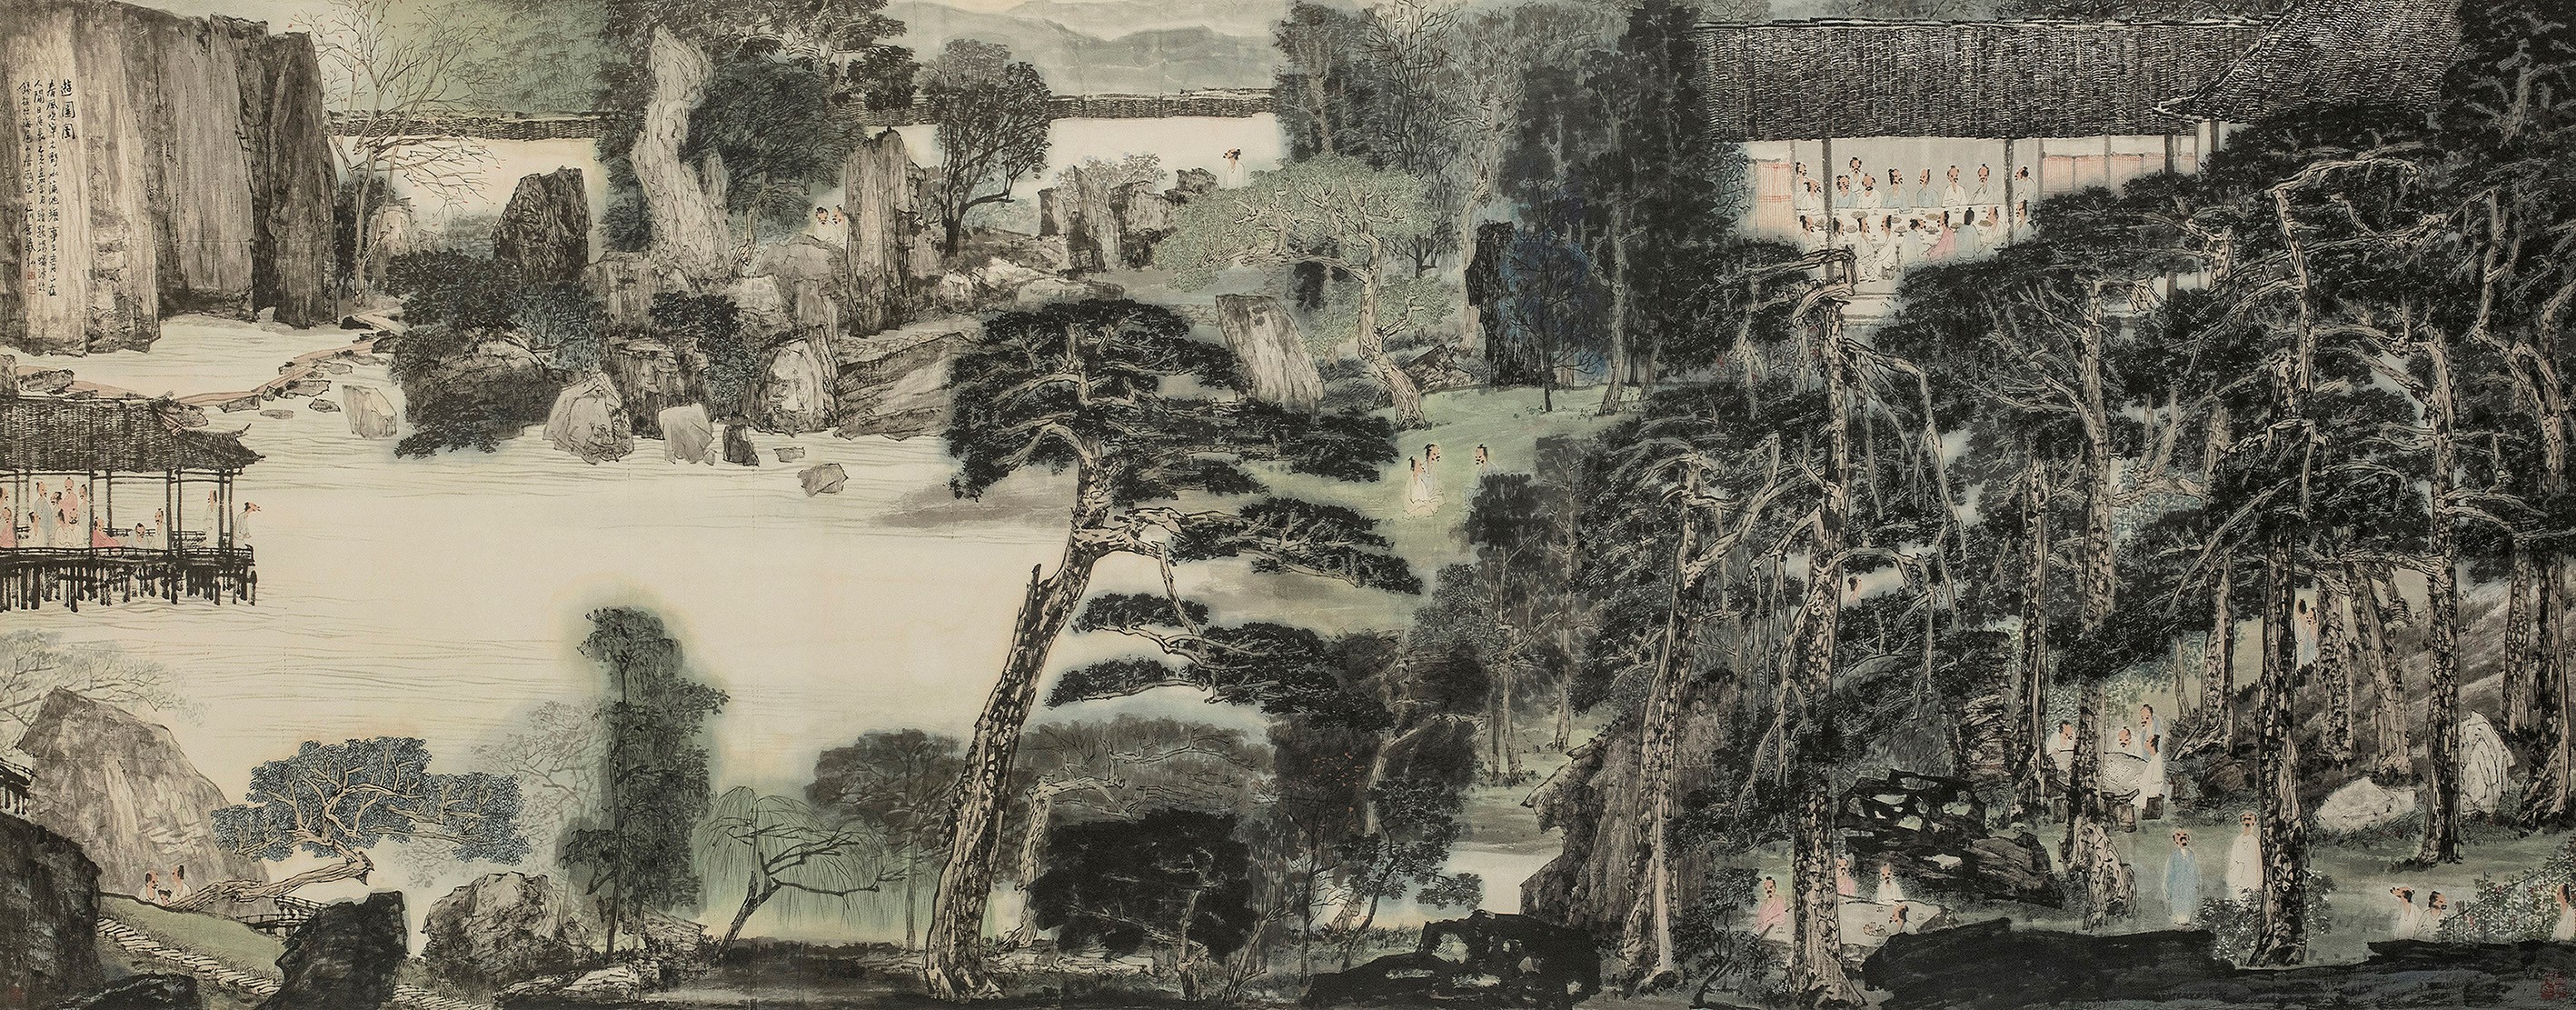 Lee Yih-hong  | Roaming the Garden Ink and colors on paper, 1995 193 x 490cm 的圖說